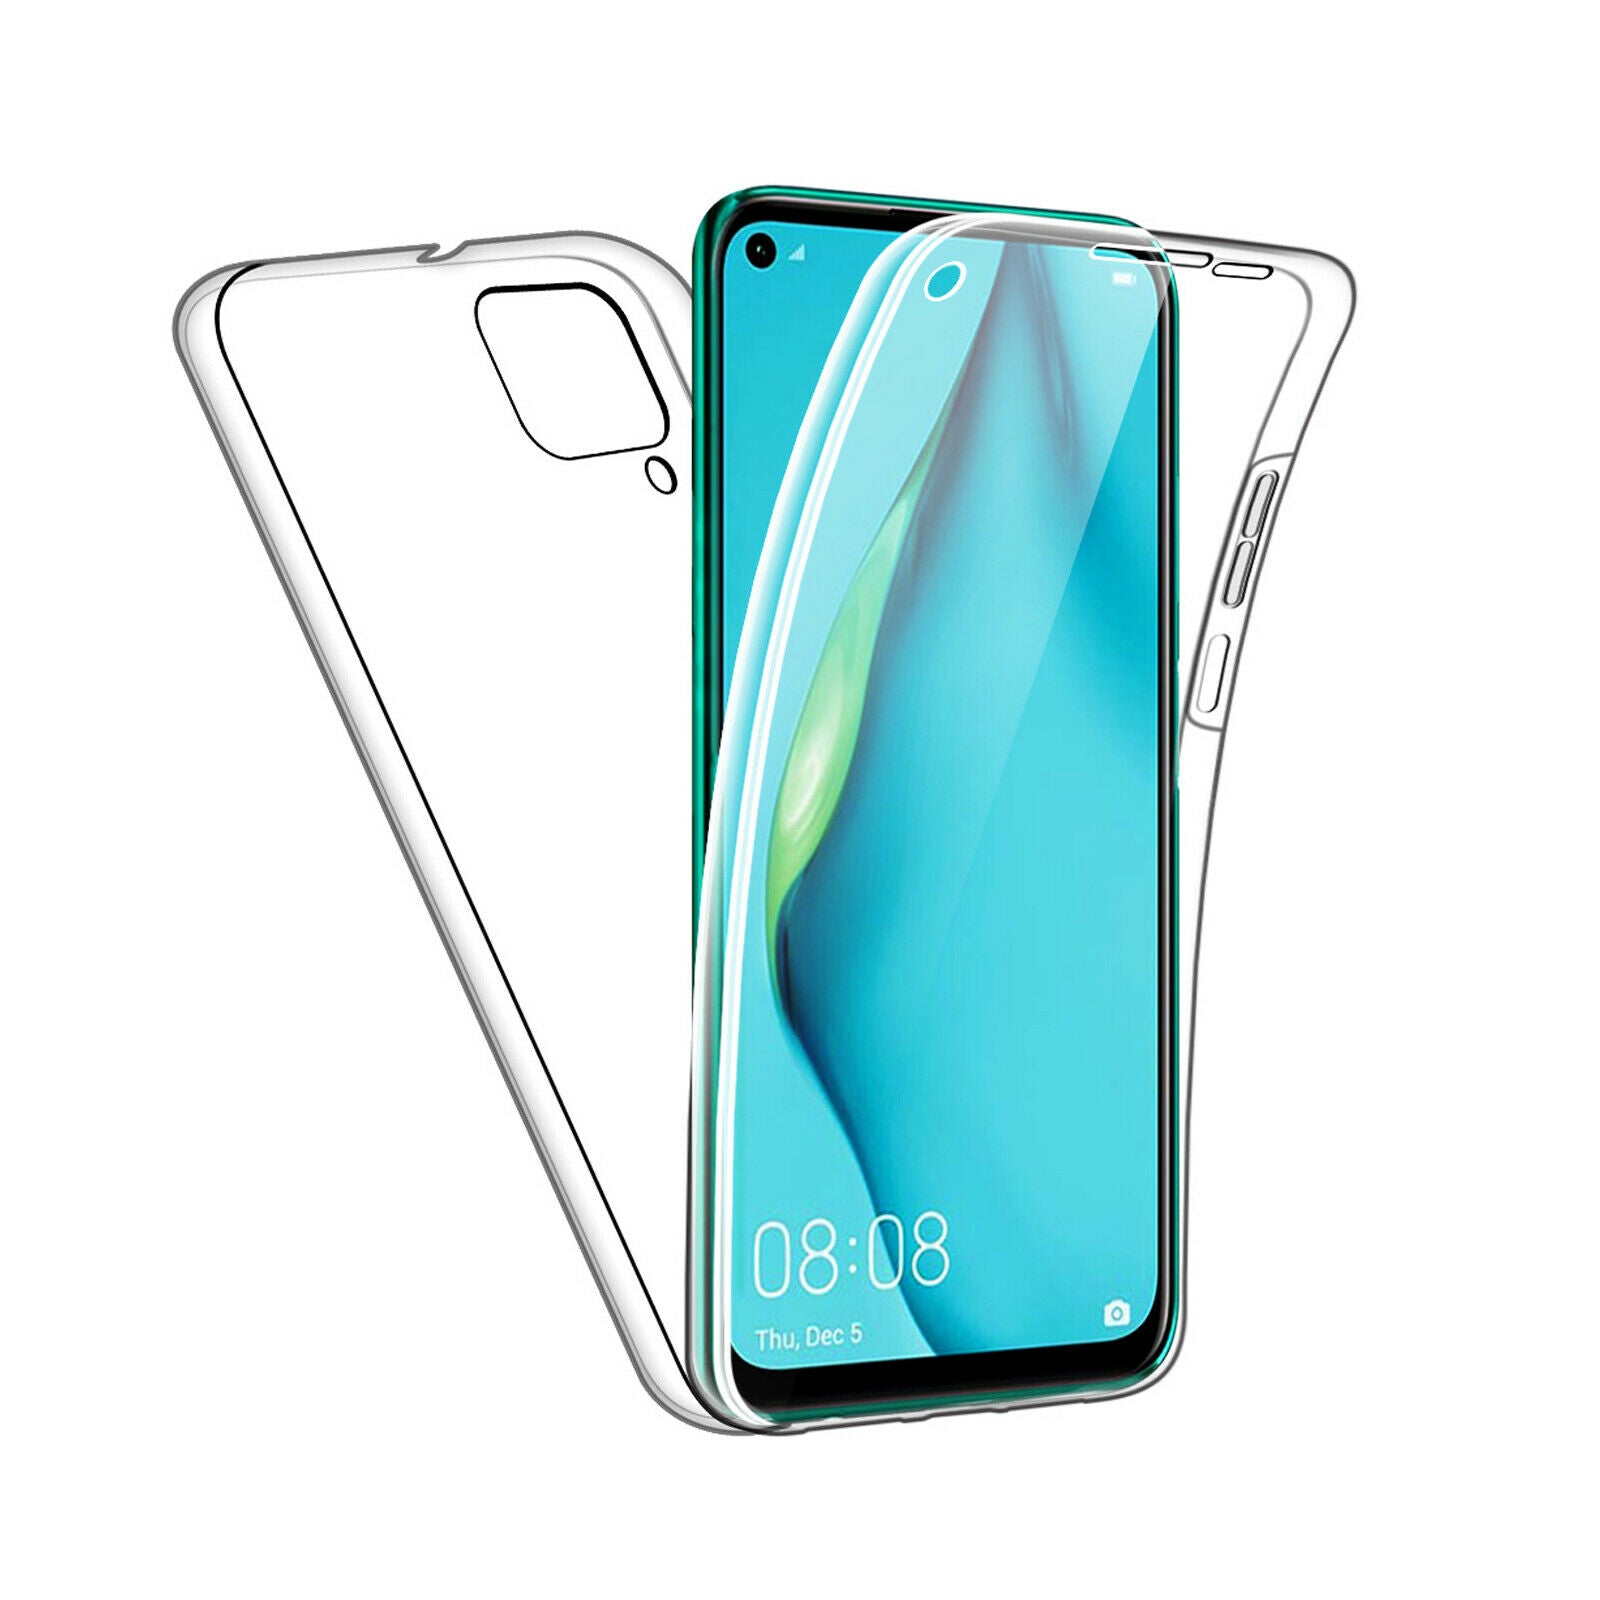 Full Protection Gel Silicone Case Cover For Huawei P20 Pro